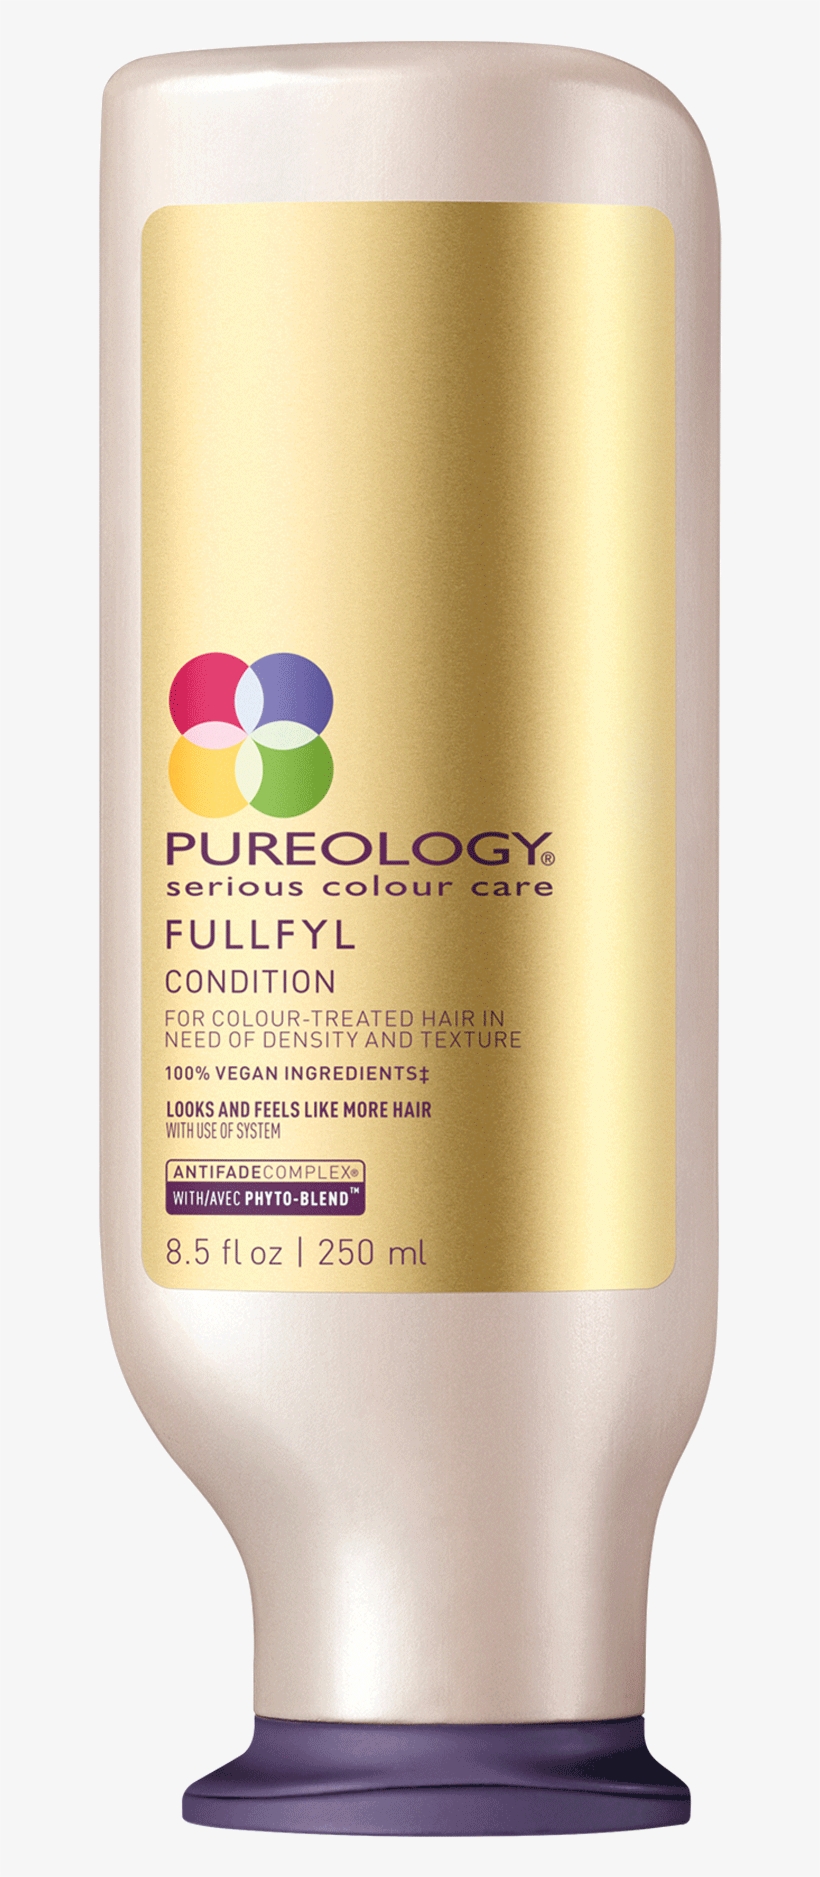 Fullfyl Hair Thickening Hair Conditioner - Pureology Conditioner, transparent png #667775